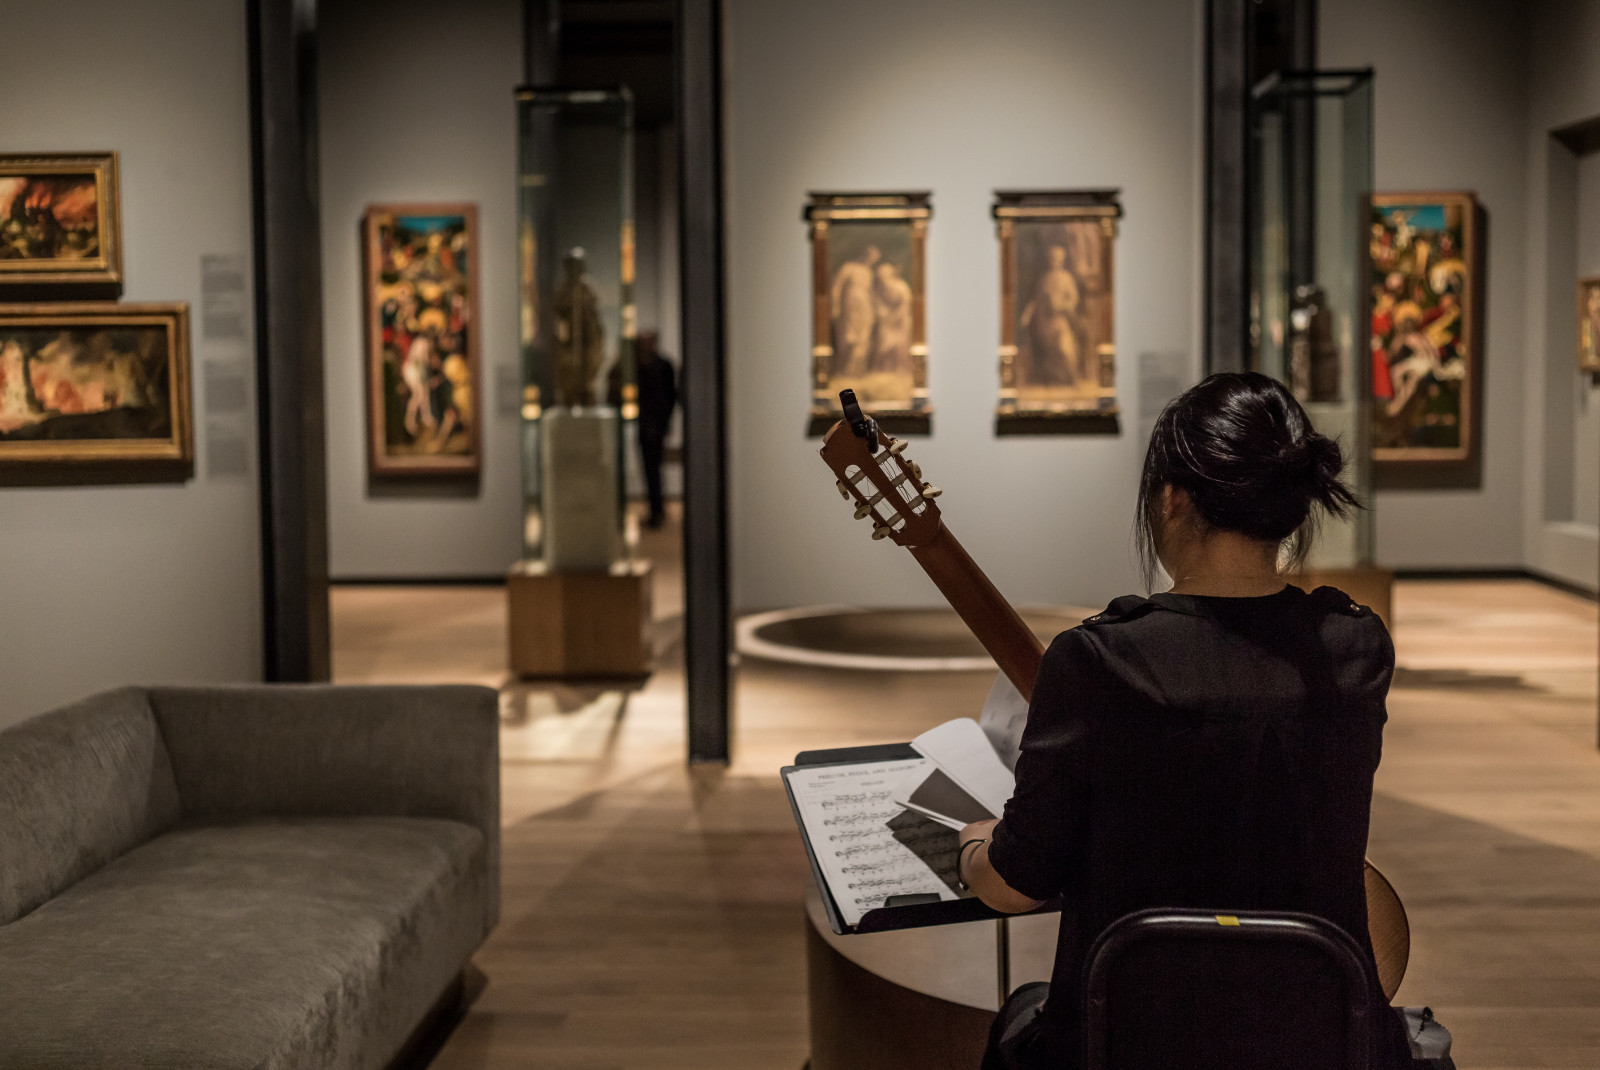 A woman from behind in black holding a guitar in a museum with six colorful painting and a tan couch